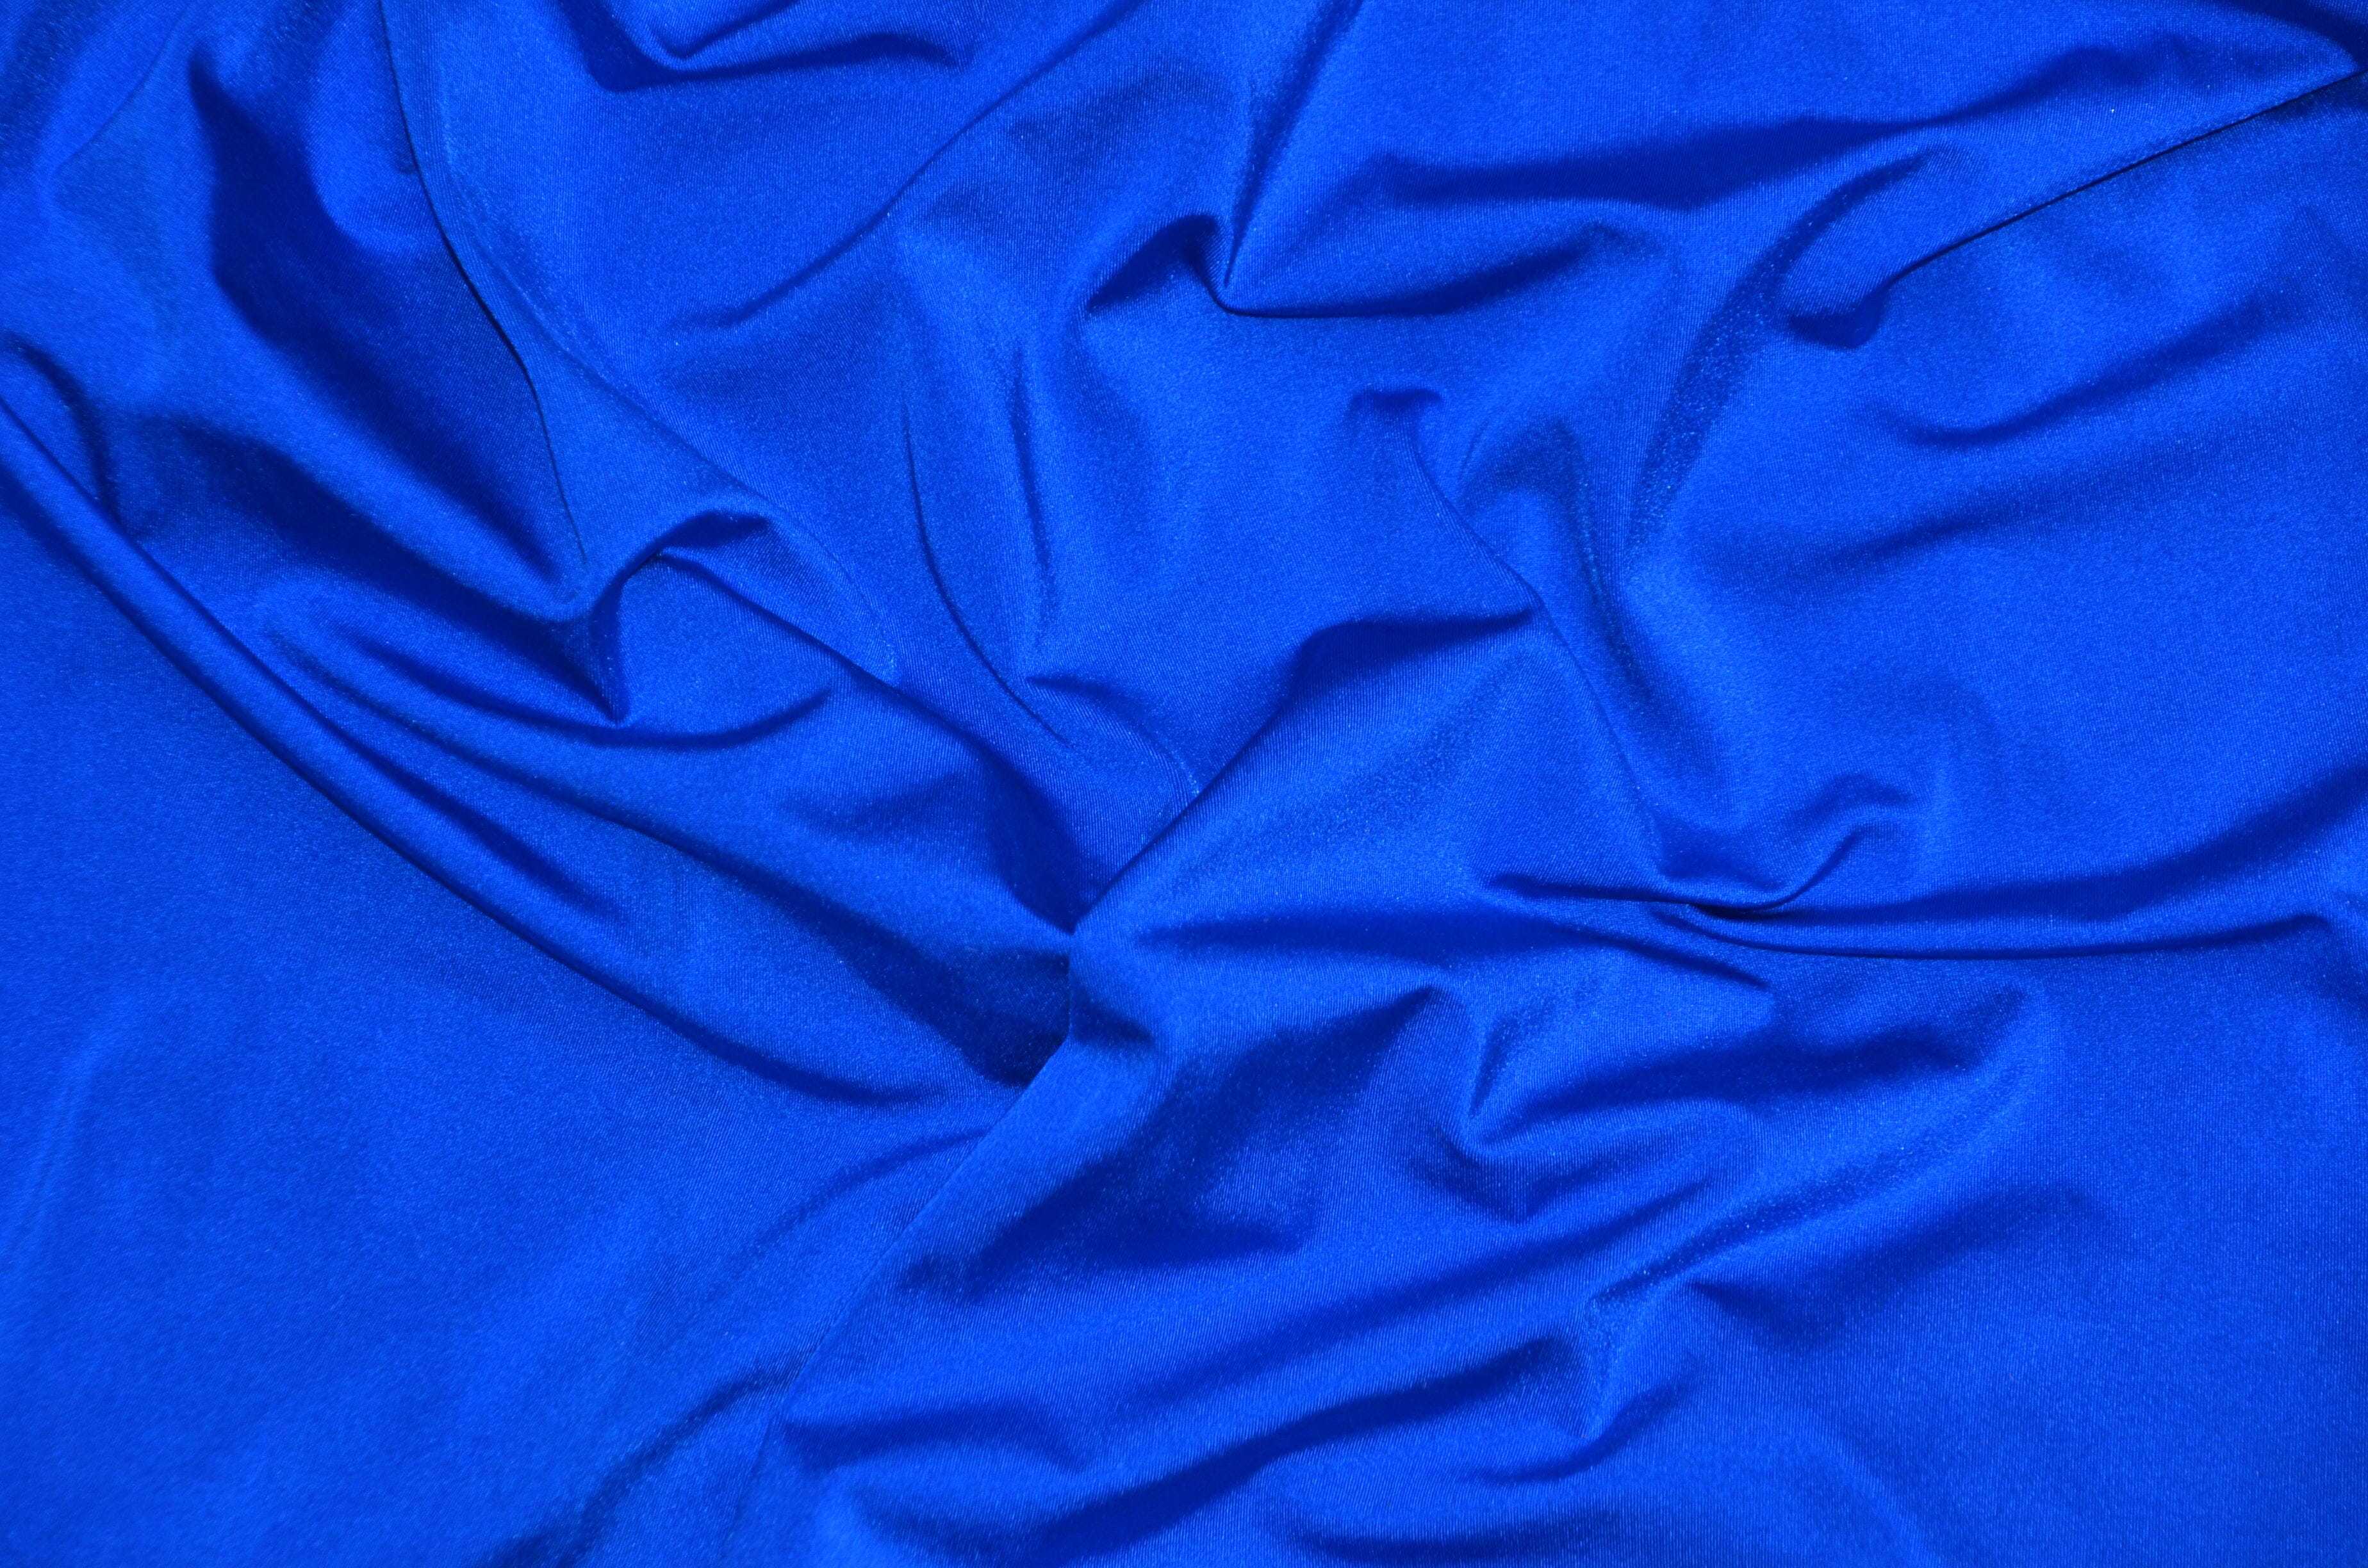 Nylon Spandex 4 Way Stretch Fabric | 60" Width | Great for Swimwear, Dancewear, Waterproof, Tablecloths, Chair Covers | Multiple Colors | Fabric mytextilefabric Yards Royal Blue 